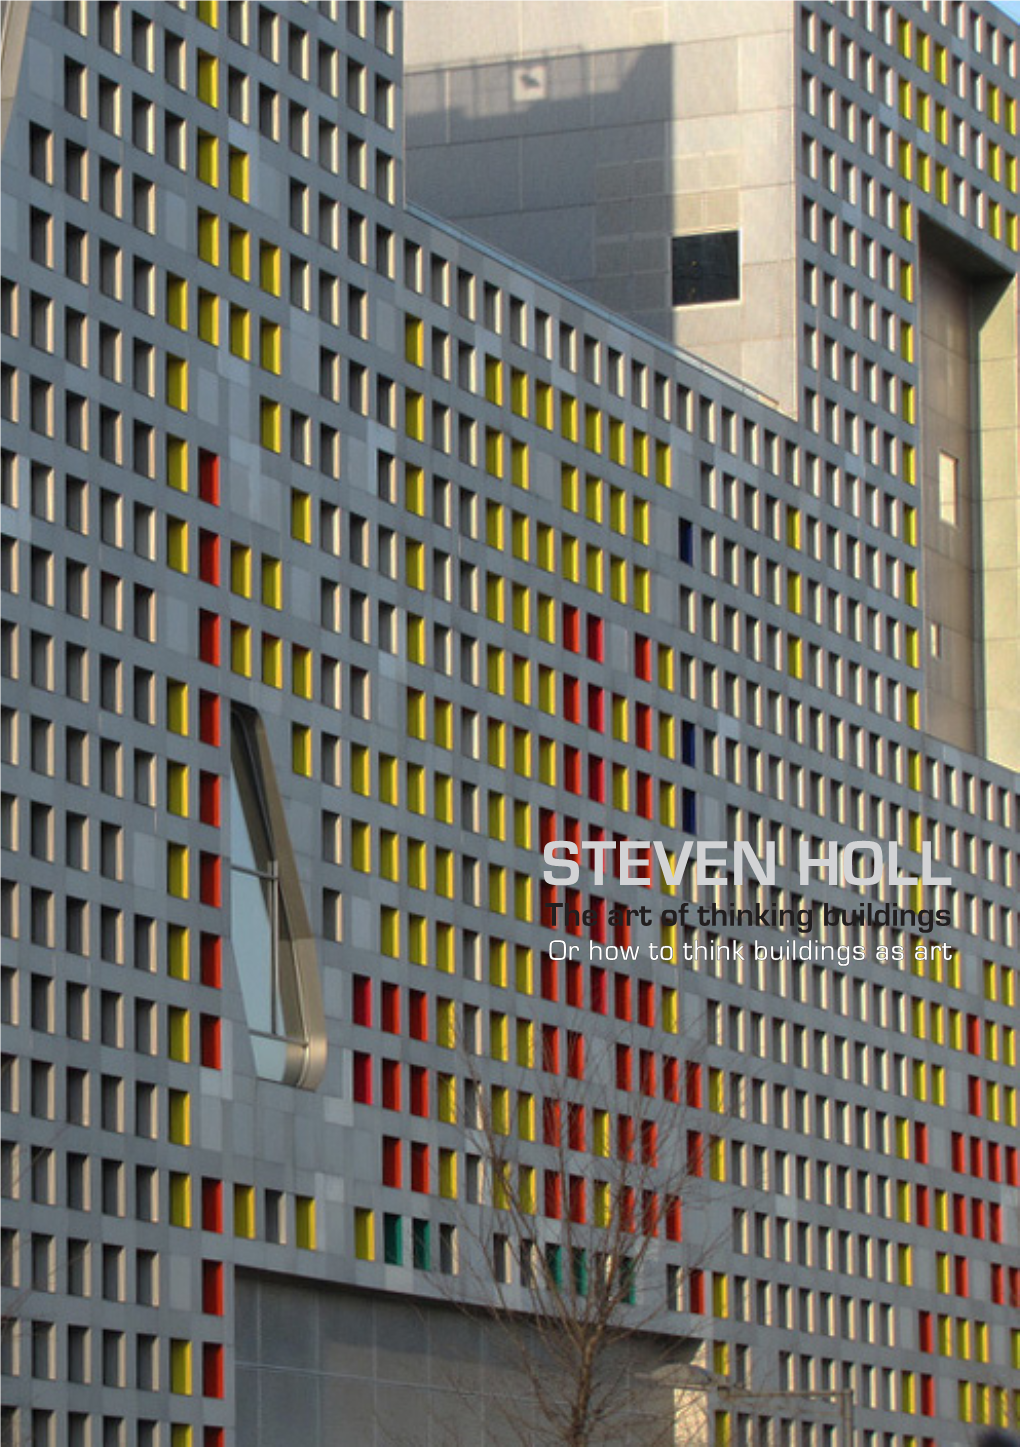 STEVEN HOLL the Art of Thinking Buildings Or How to Think Buildings As Art CONTENTS